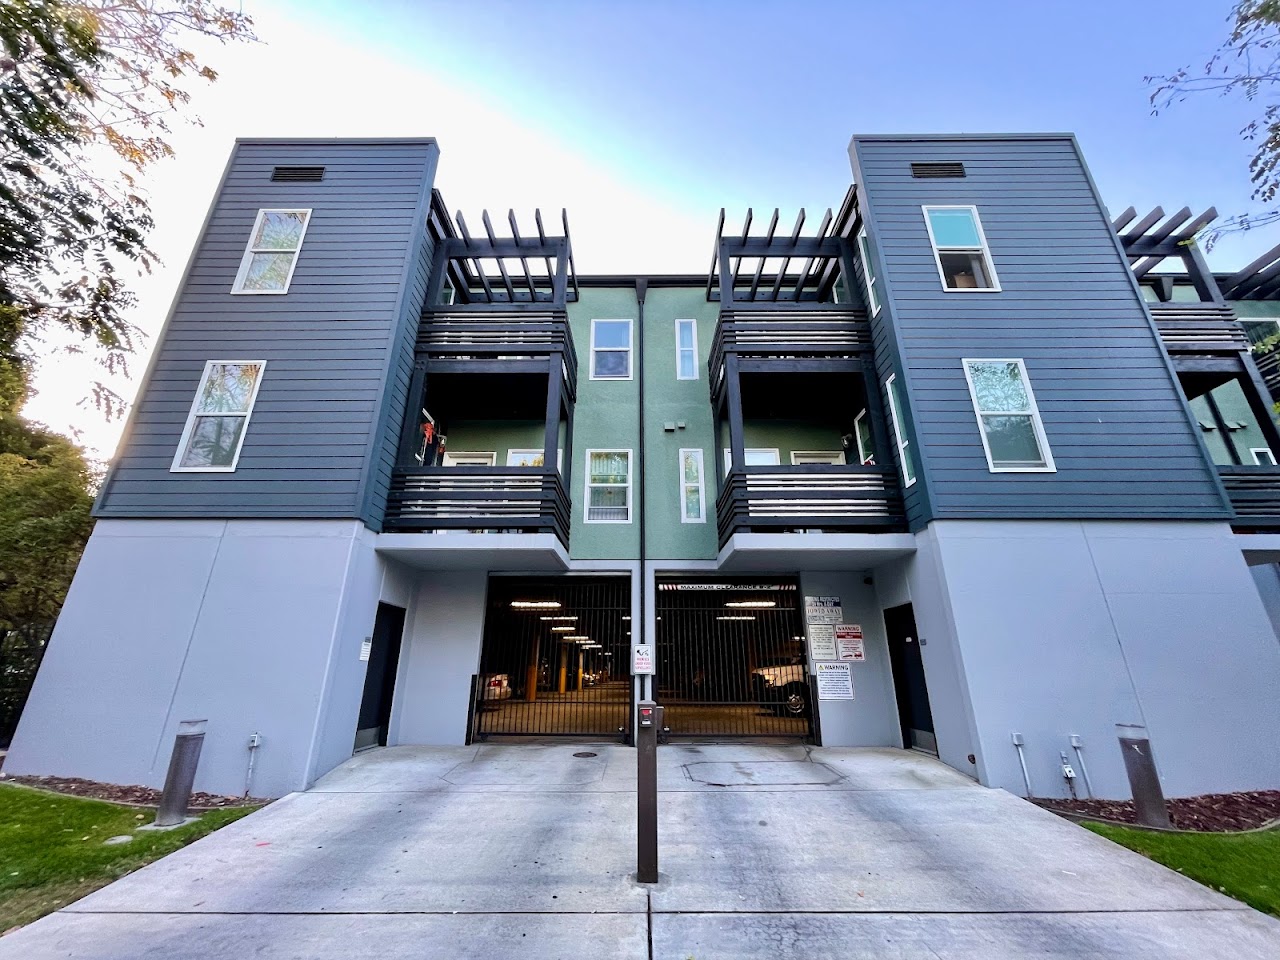 Photo of LENZEN SQUARE. Affordable housing located at 790 LENZEN AVENUE SAN JOSE, CA 95113